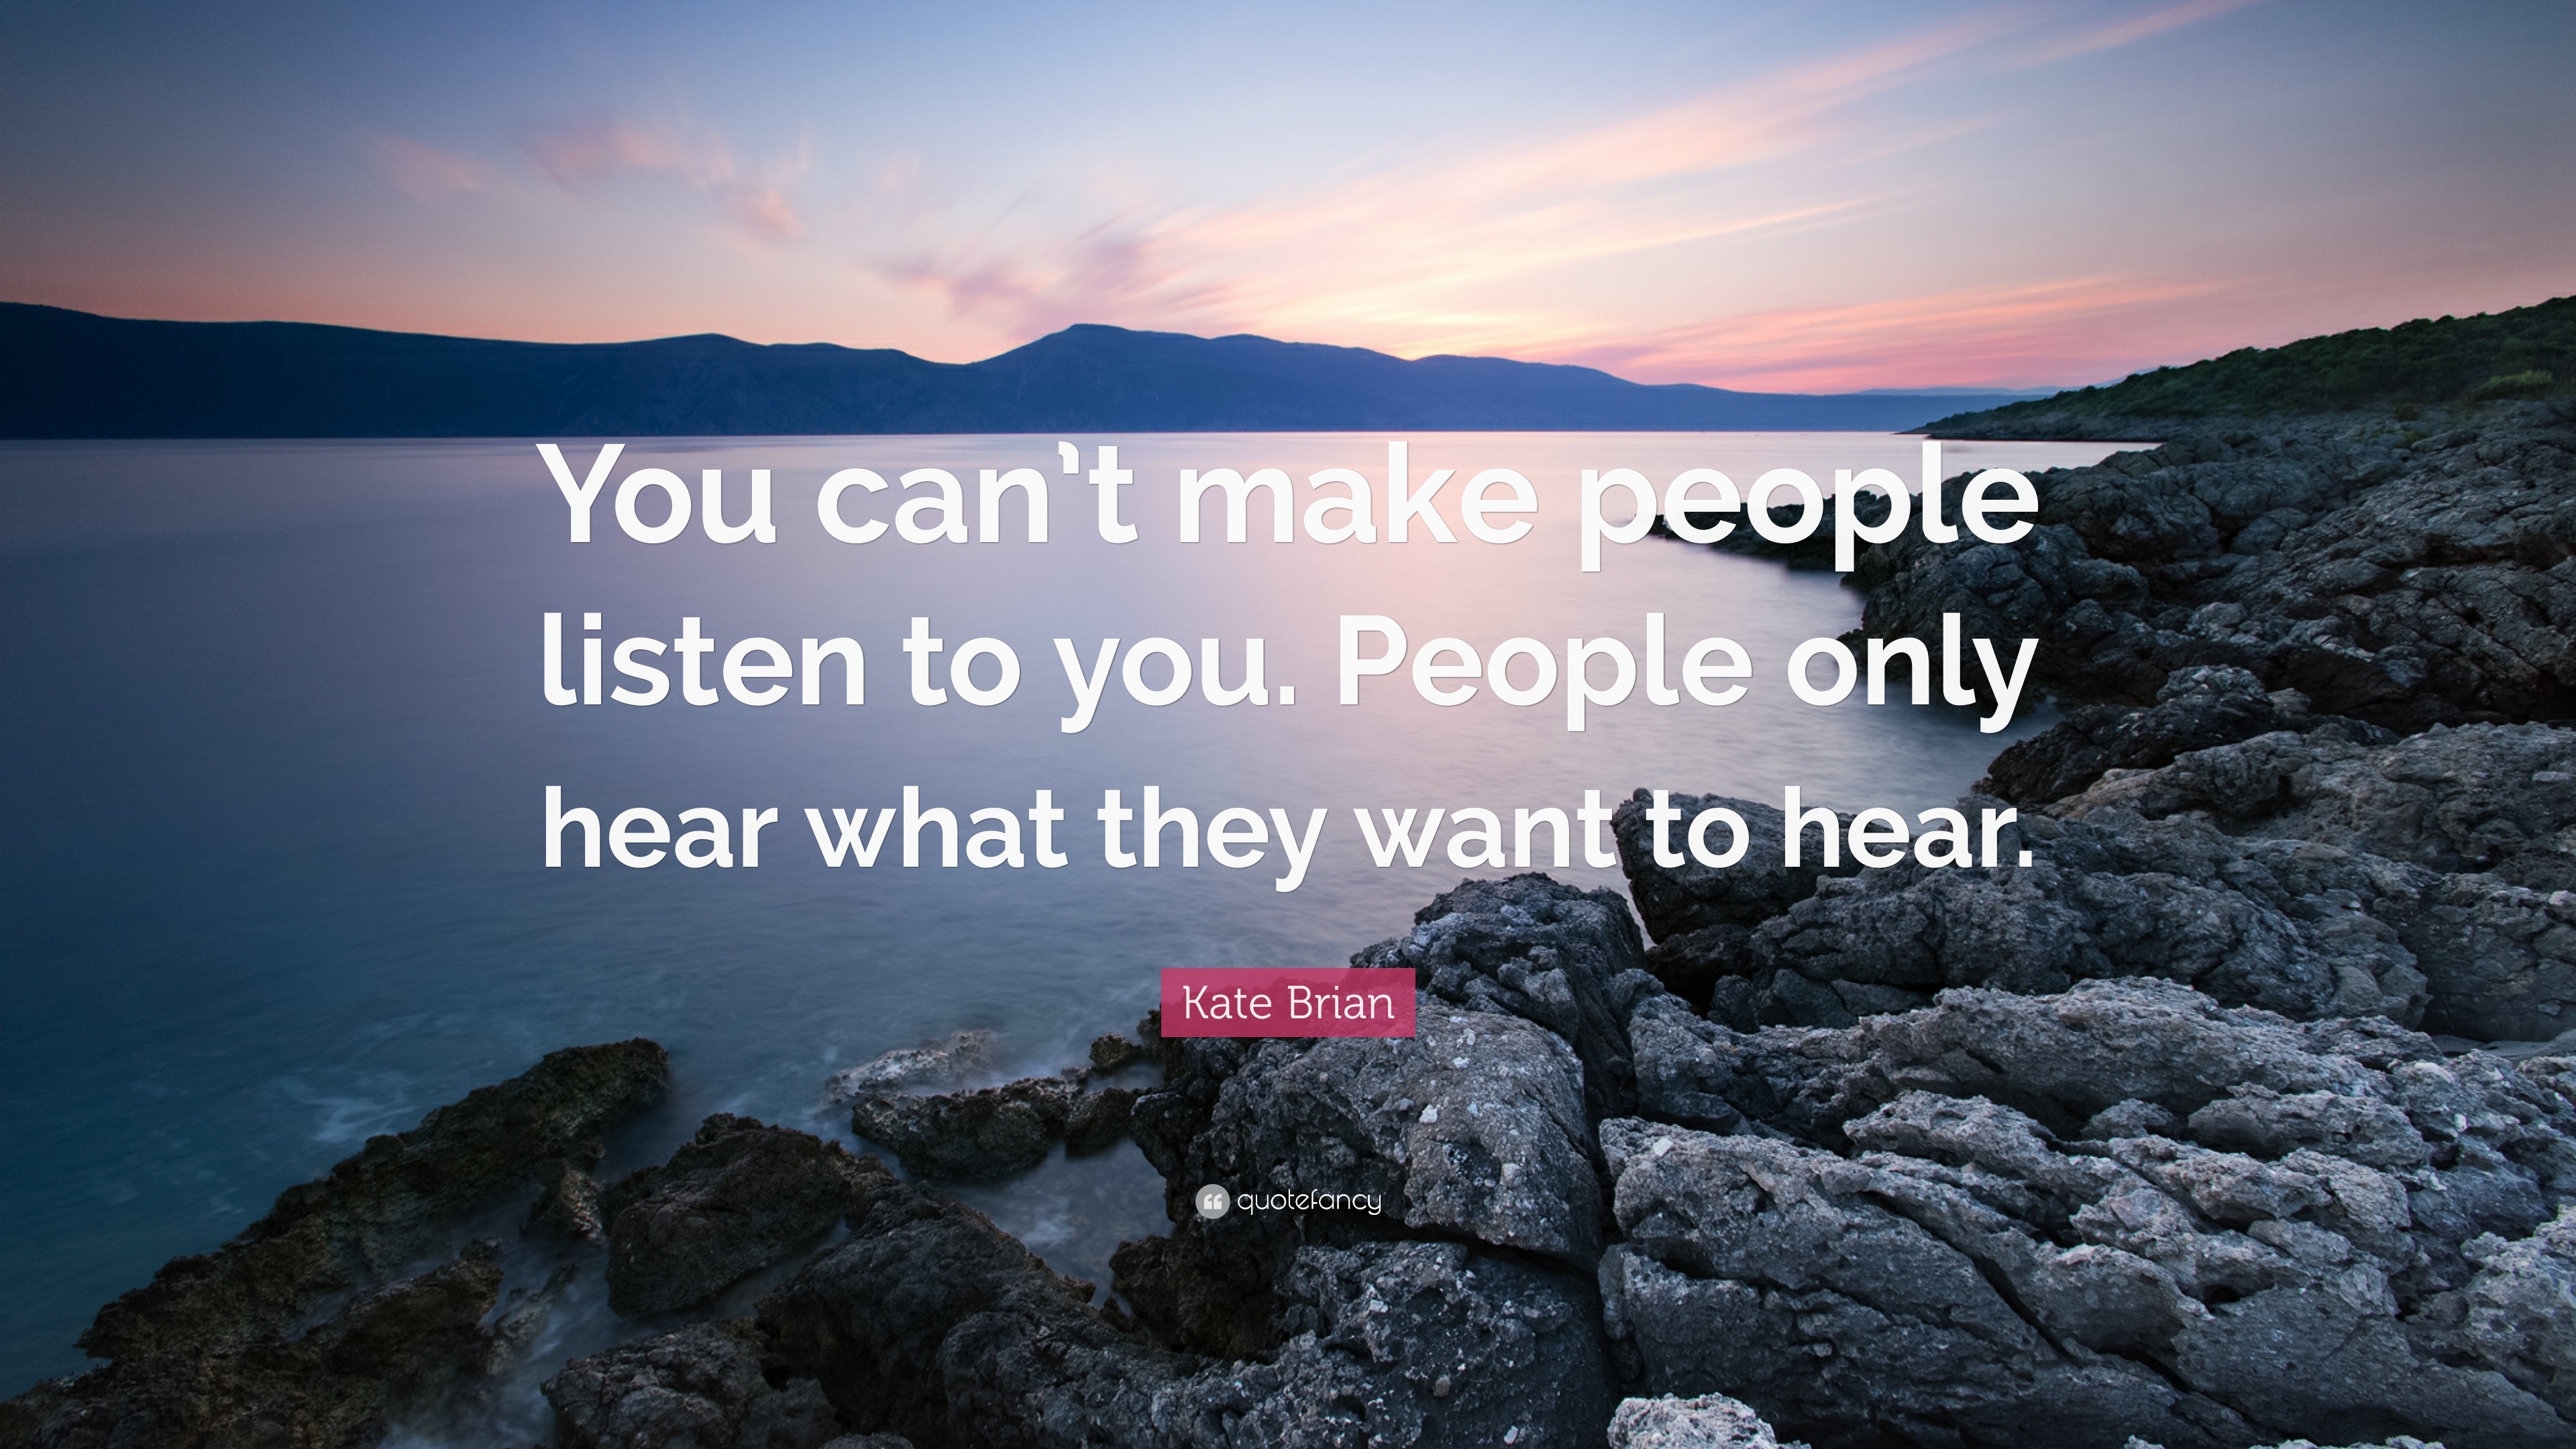 Kate Brian Quote: “You can’t make people listen to you. People only ...